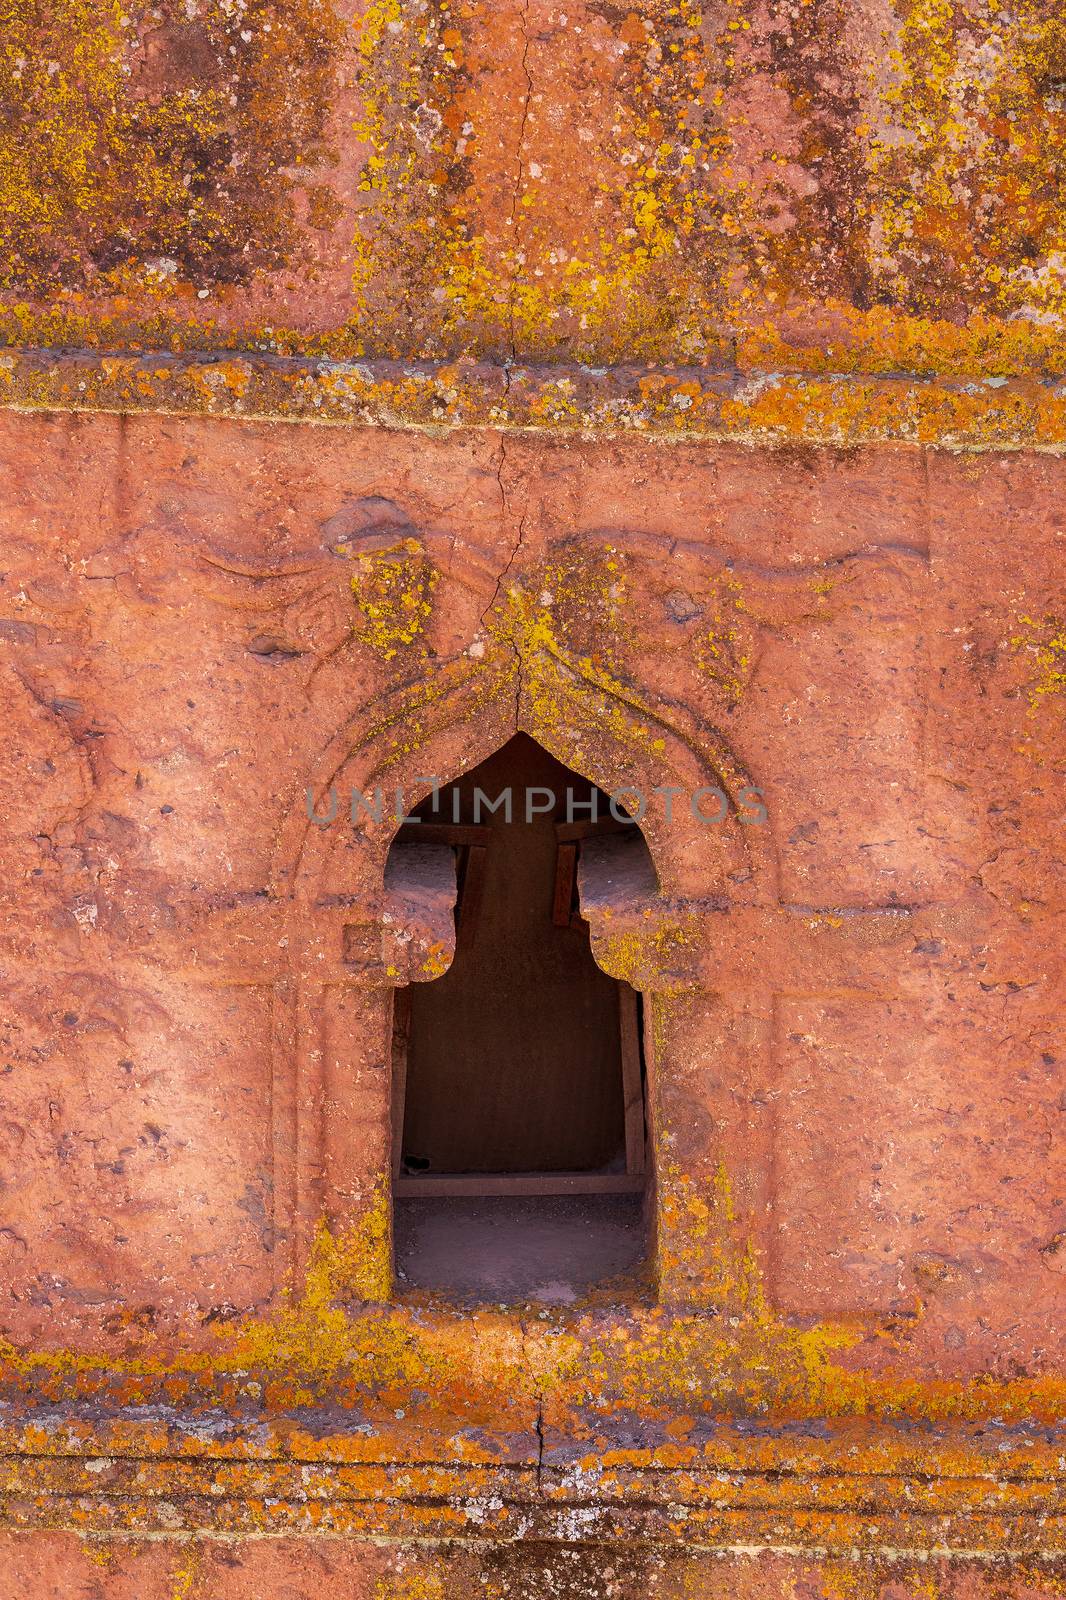 detail of carved window in Rock-hewn Church of Saint George in the shape of a cross, Bete Giyorgis, monolithic church in Lalibela, UNESCO World Heritage Site Rock-Hewn Churches. The Church was carved downwards from one monolitic stone